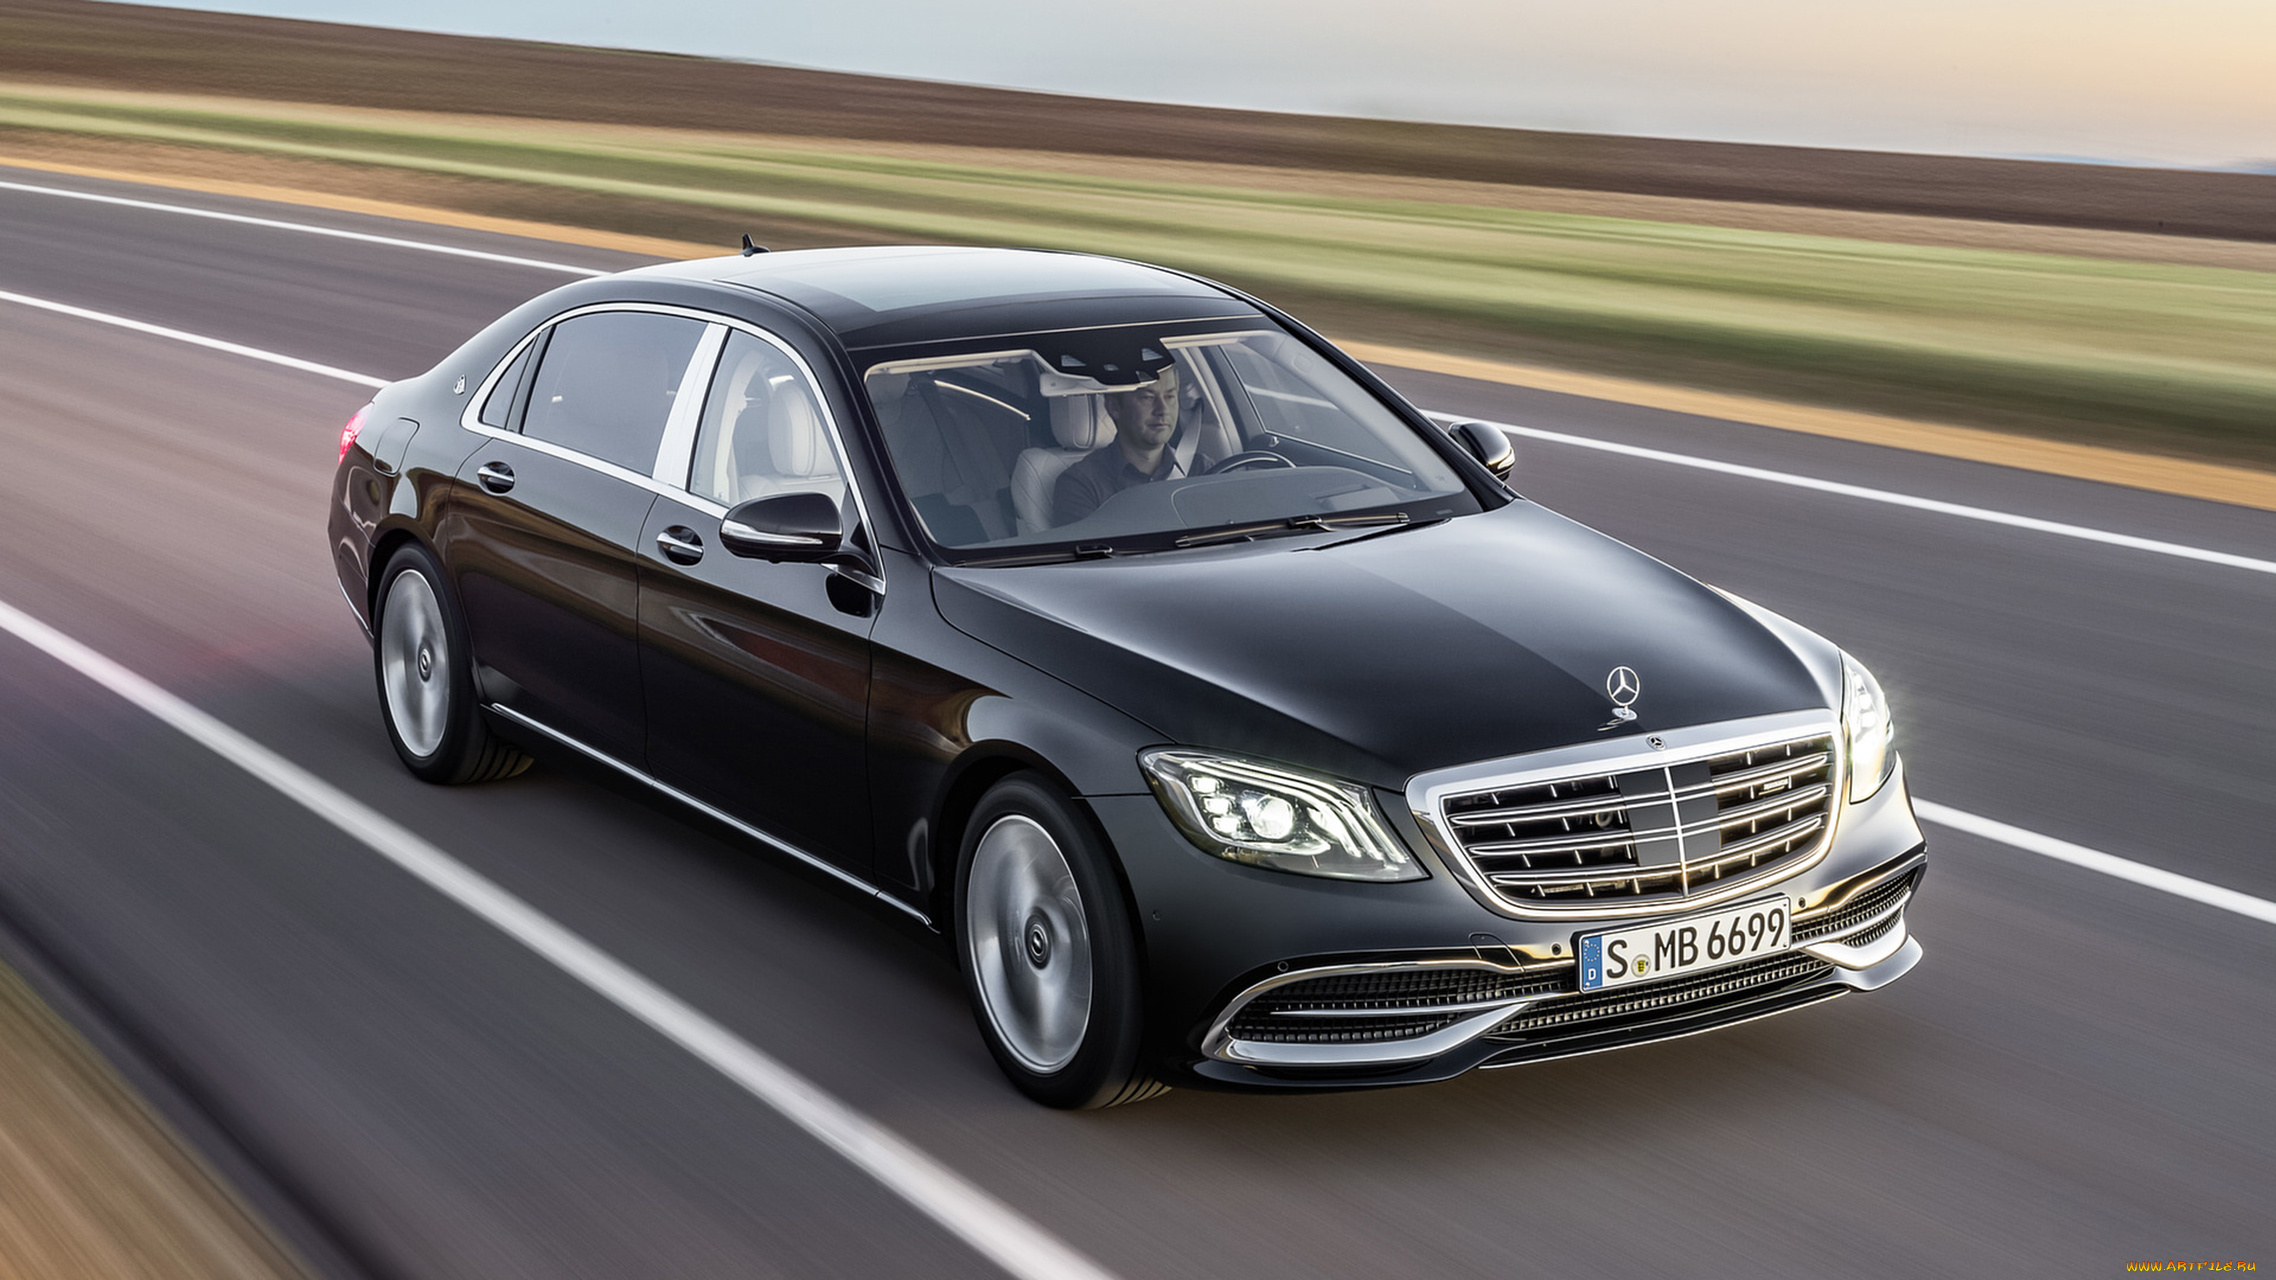 mercedes-maybach, s-class, s650, black, 2018, автомобили, mercedes-benz, black, 2018, s-class, s650, mercedes-maybach